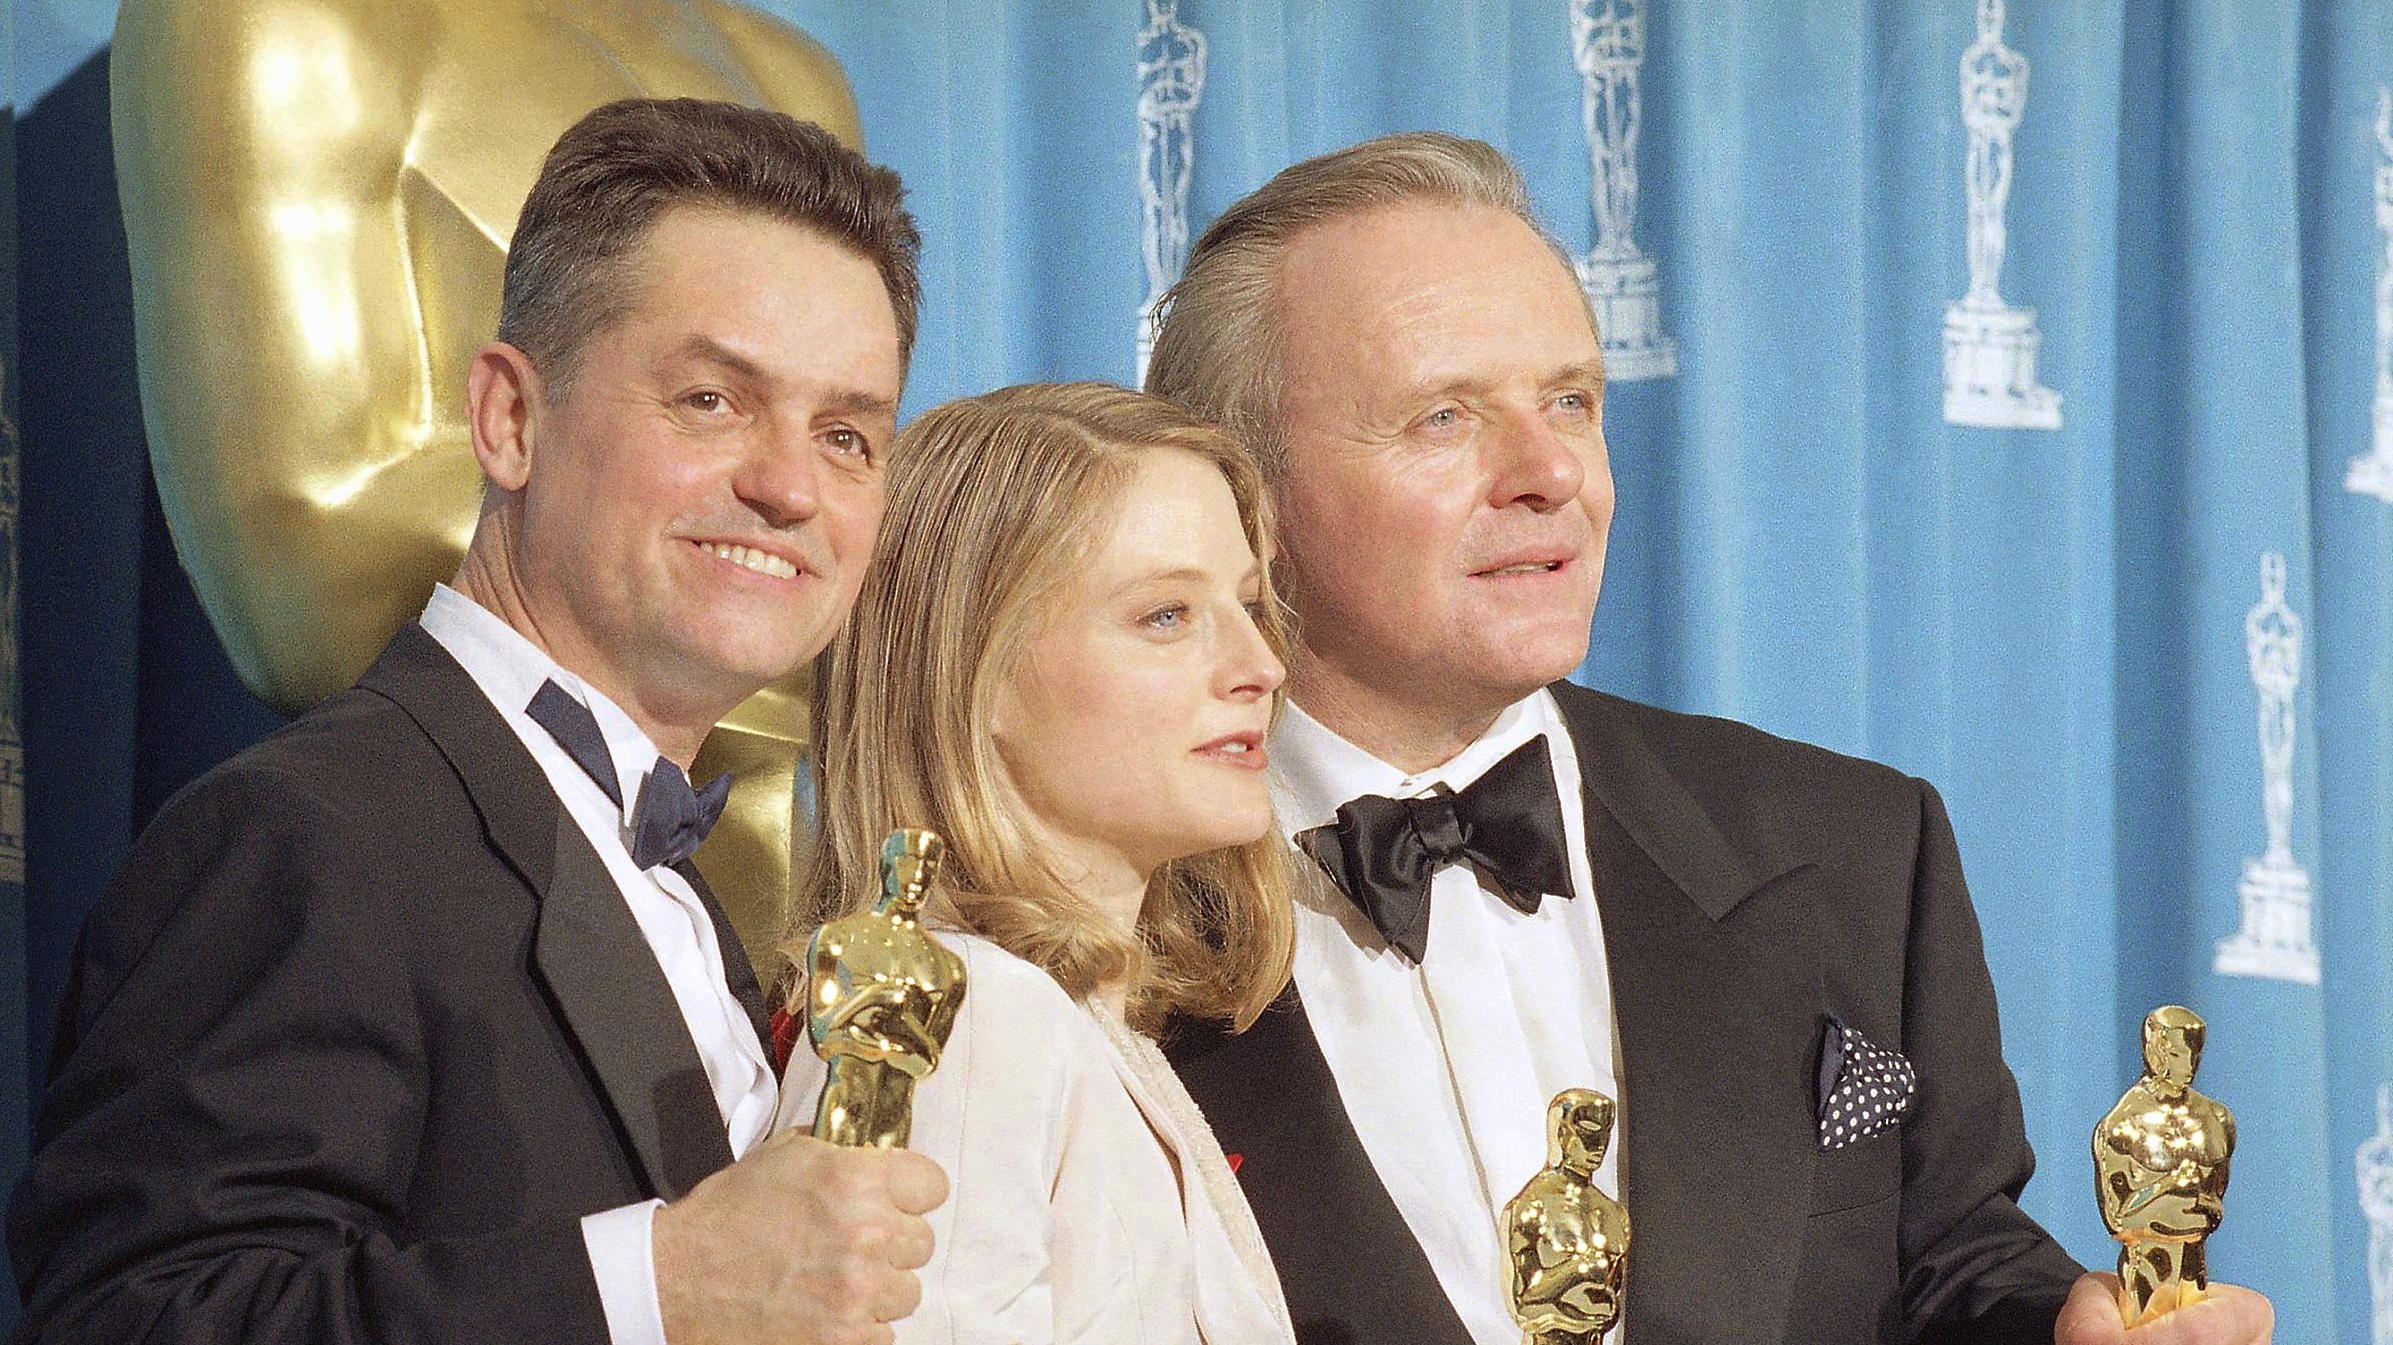 The Silence Of The Lambs fans are planning a special tribute to director Jonathan Demme